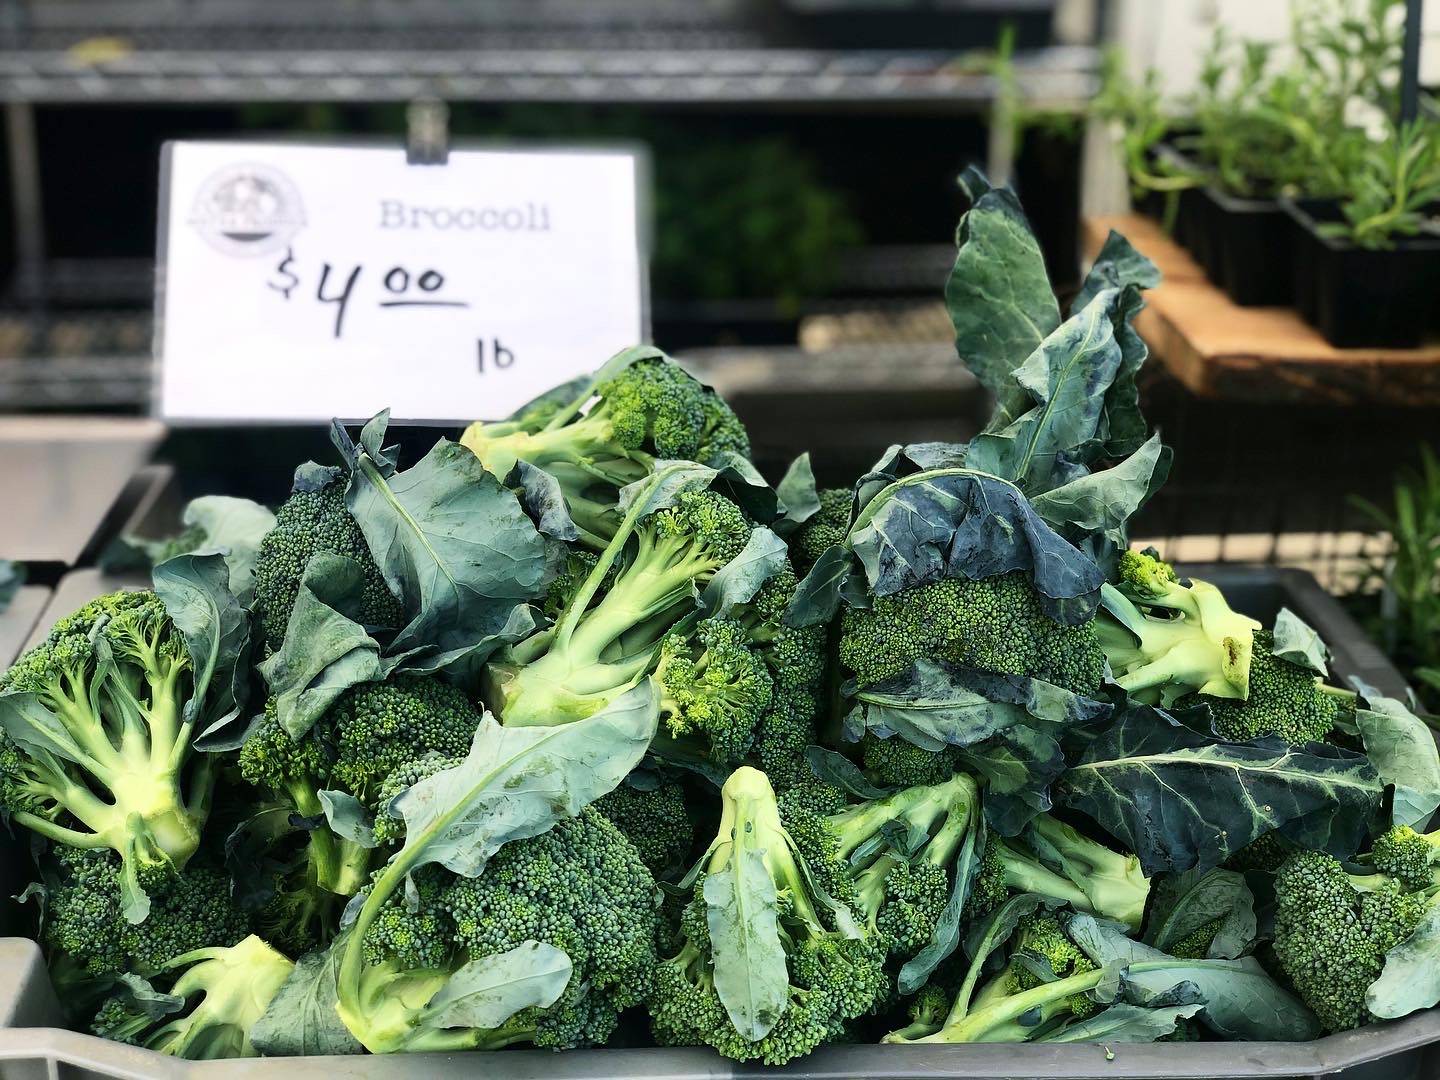 A heap of broccoli heads with leaves still attached lay on a table at the Urbana Market in the Square. Behind them is a white, small rectangular sign with the price of $4.00 per pound. Photo by Alyssa Buckley.